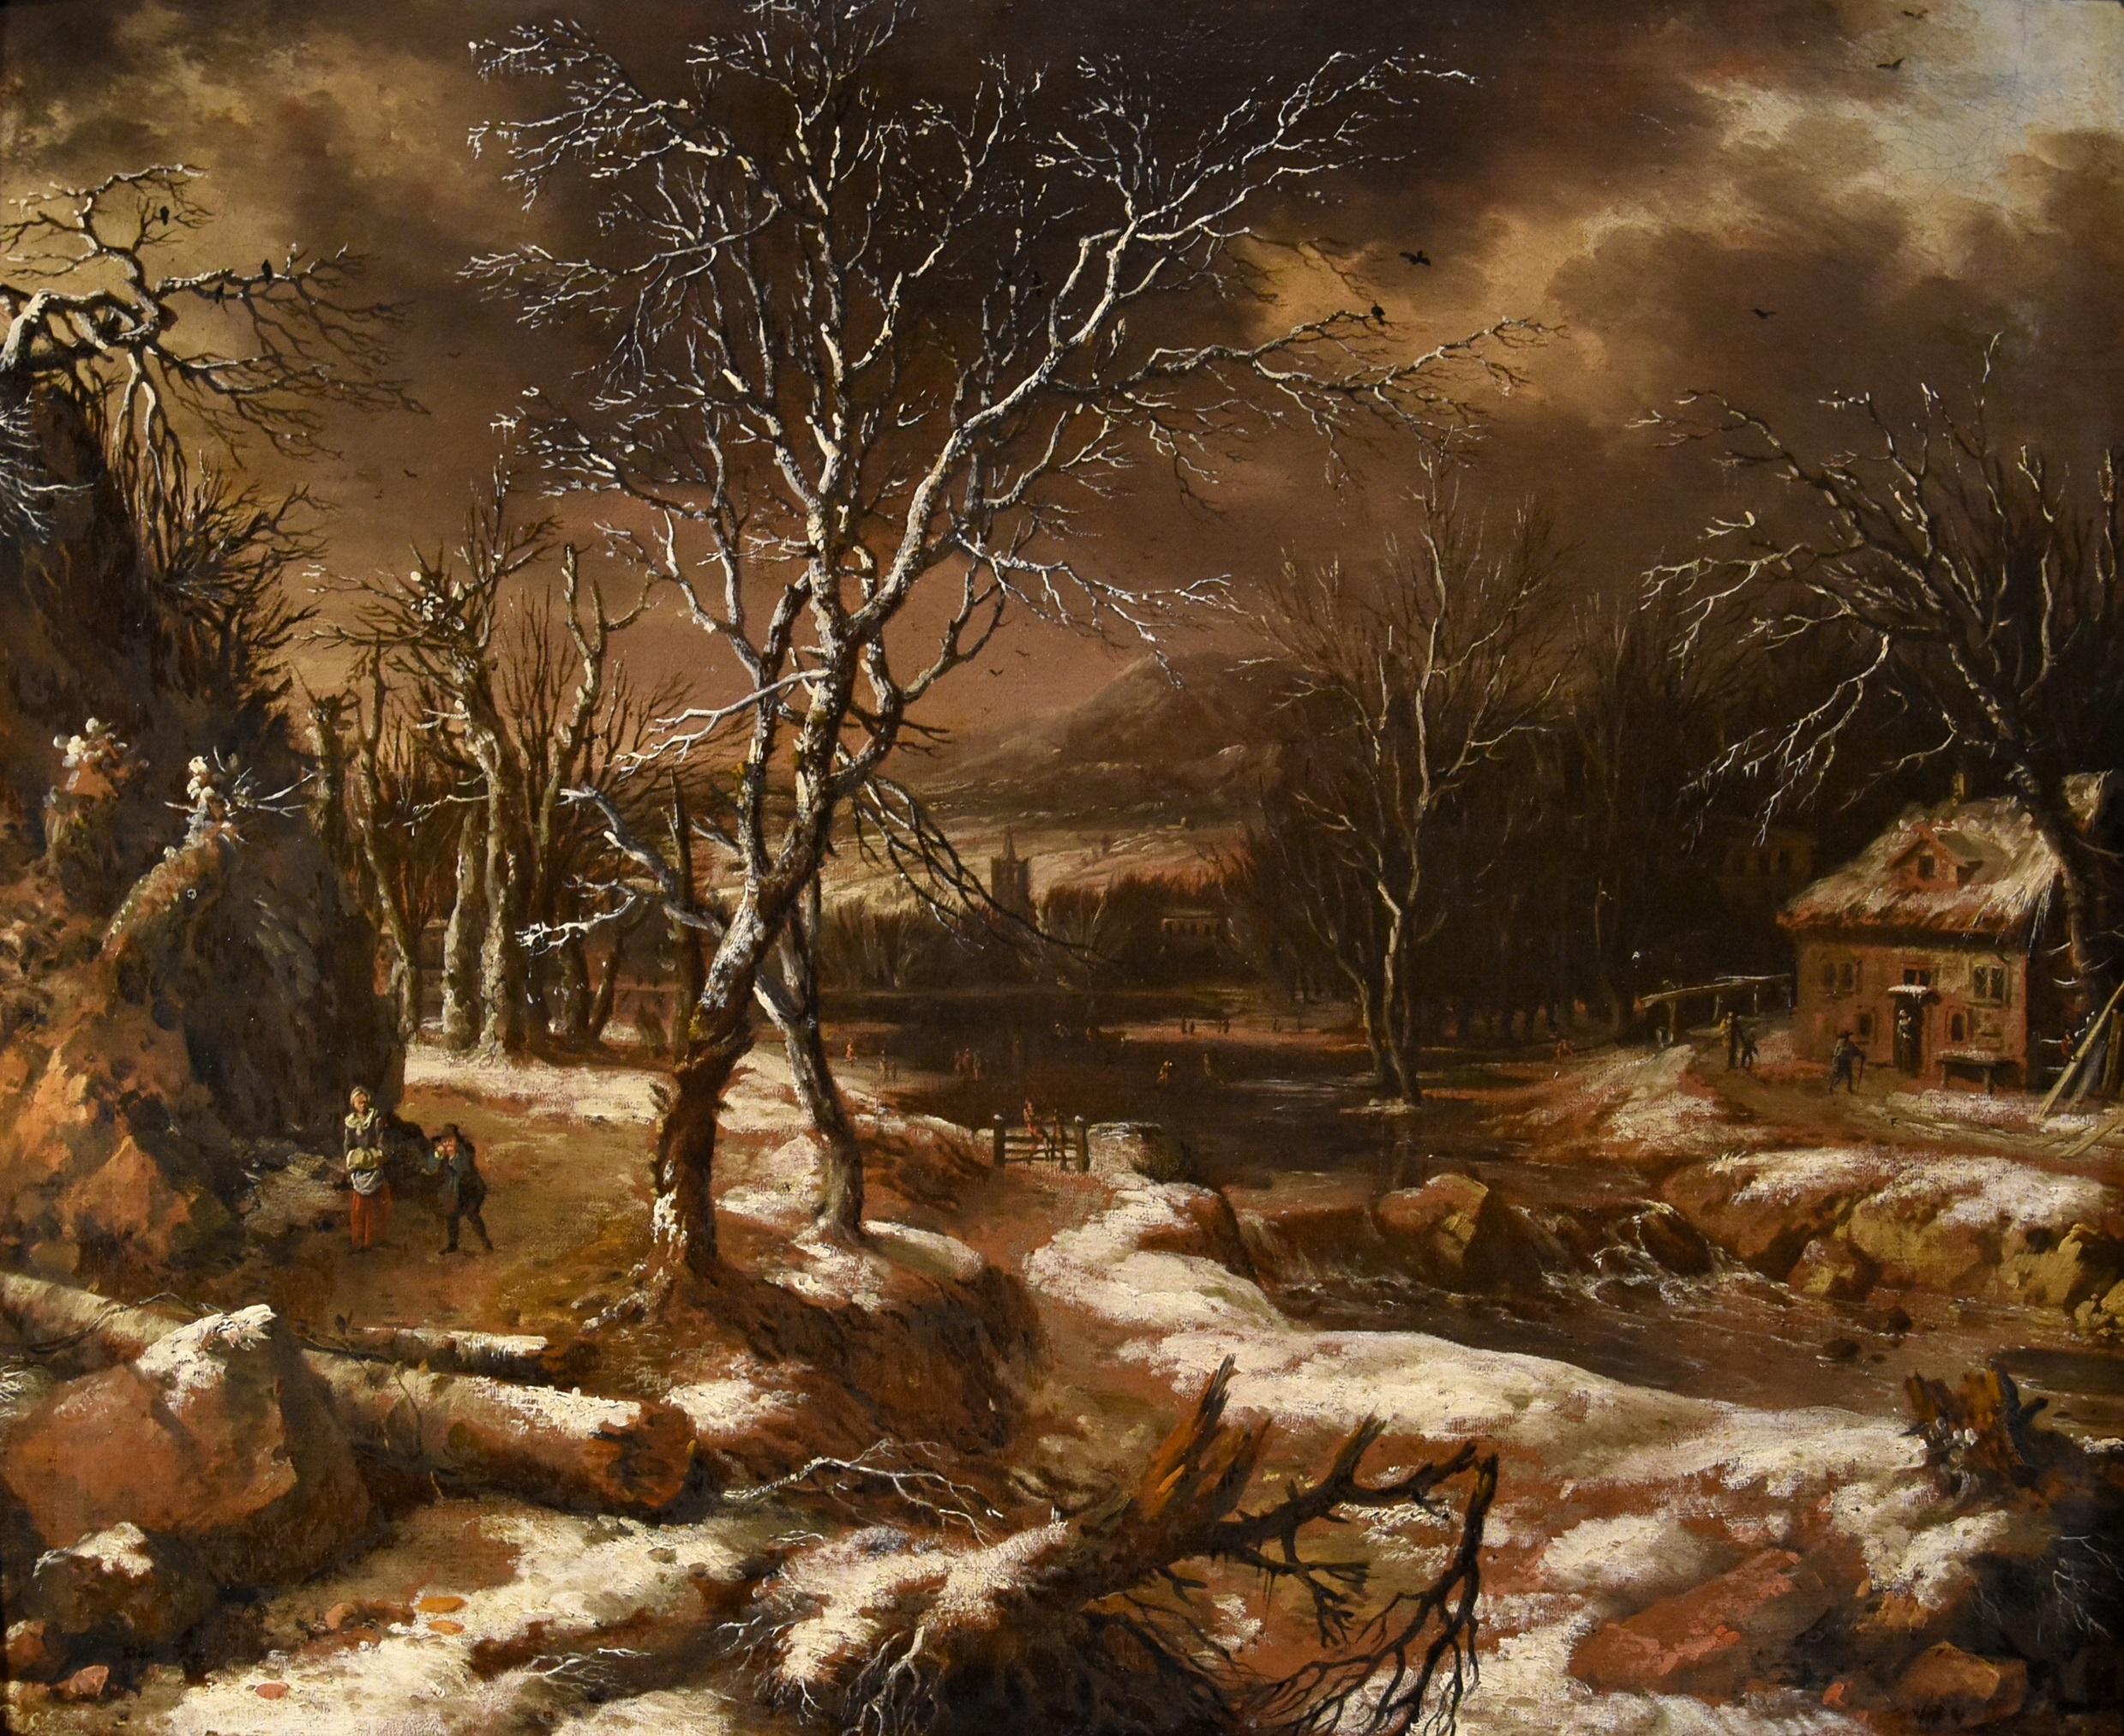 Winter Landscape Molenaer Paint 17th Century Oil on canvas Old master Flemish - Old Masters Painting by Nicolaes (or Claes) Molenaer (Haarlem c. 1630 - 1676)